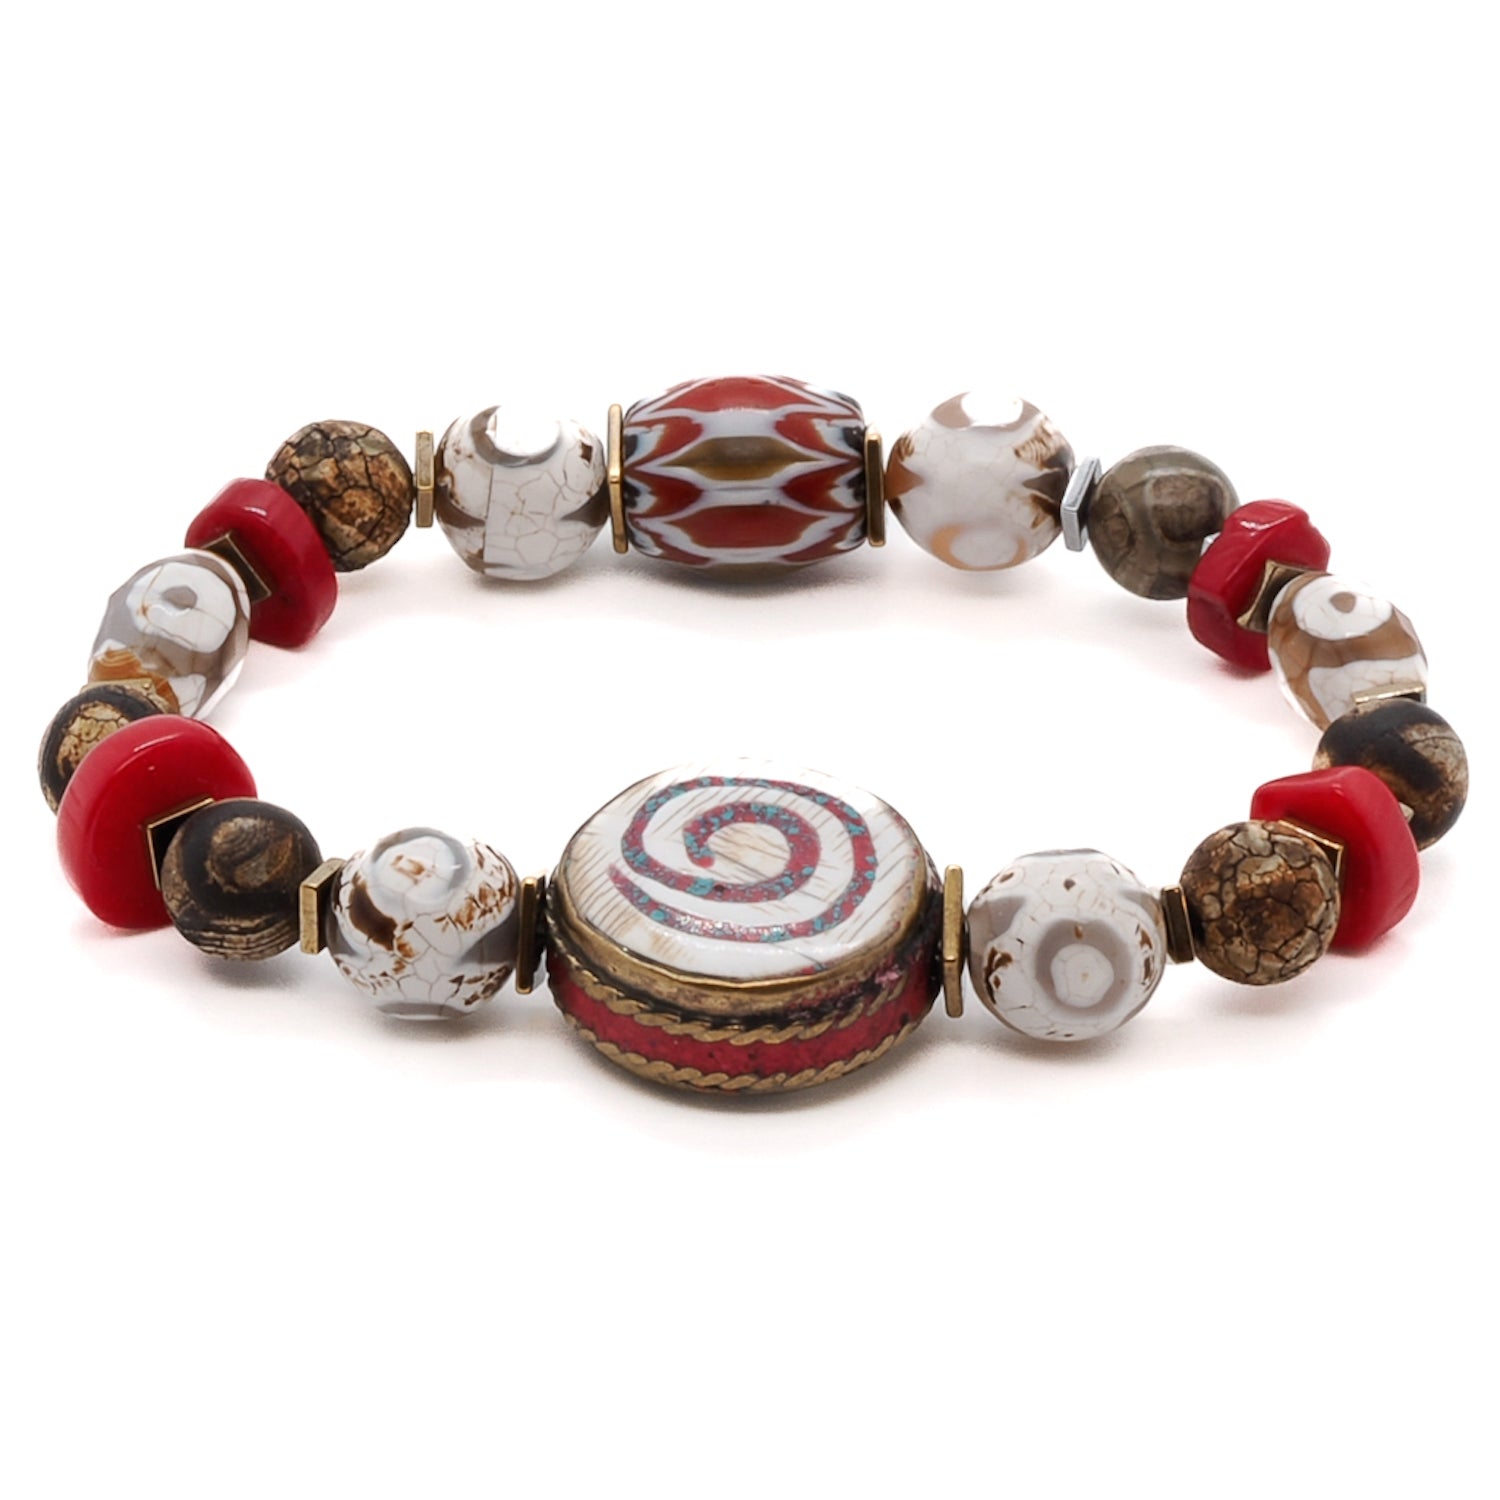 Embrace the positive energy of the Yoga Spirit Mystic Bracelet, featuring coral stone beads, Nepal meditation beads, and a spiral charm with coral stone inlay.